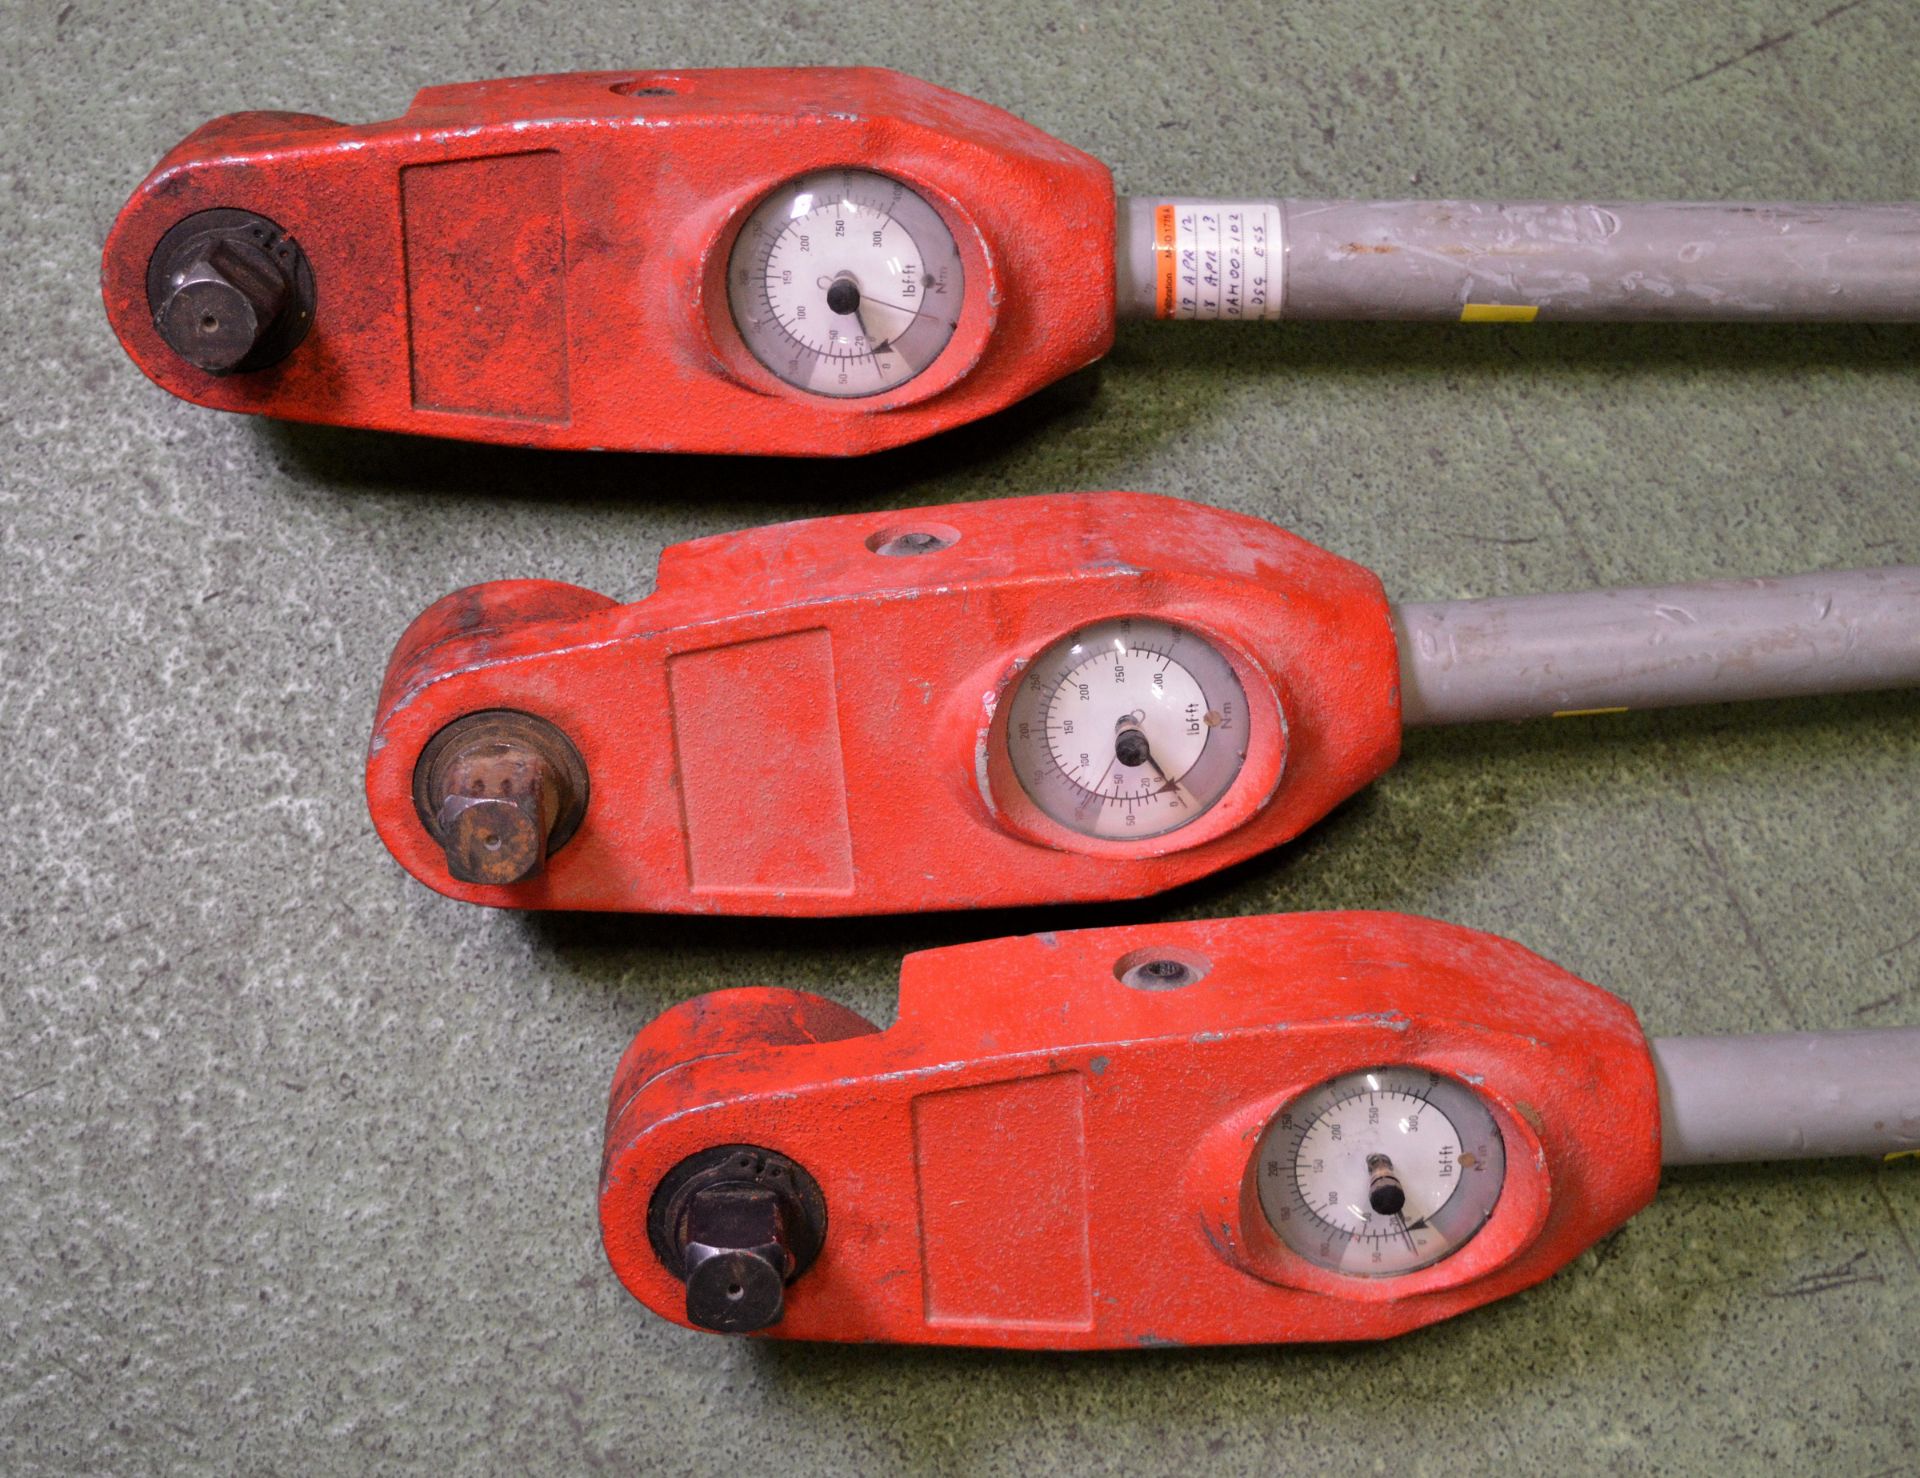 3x Dial Torque Wrenches 3/4in 0-400Nm - Image 2 of 2